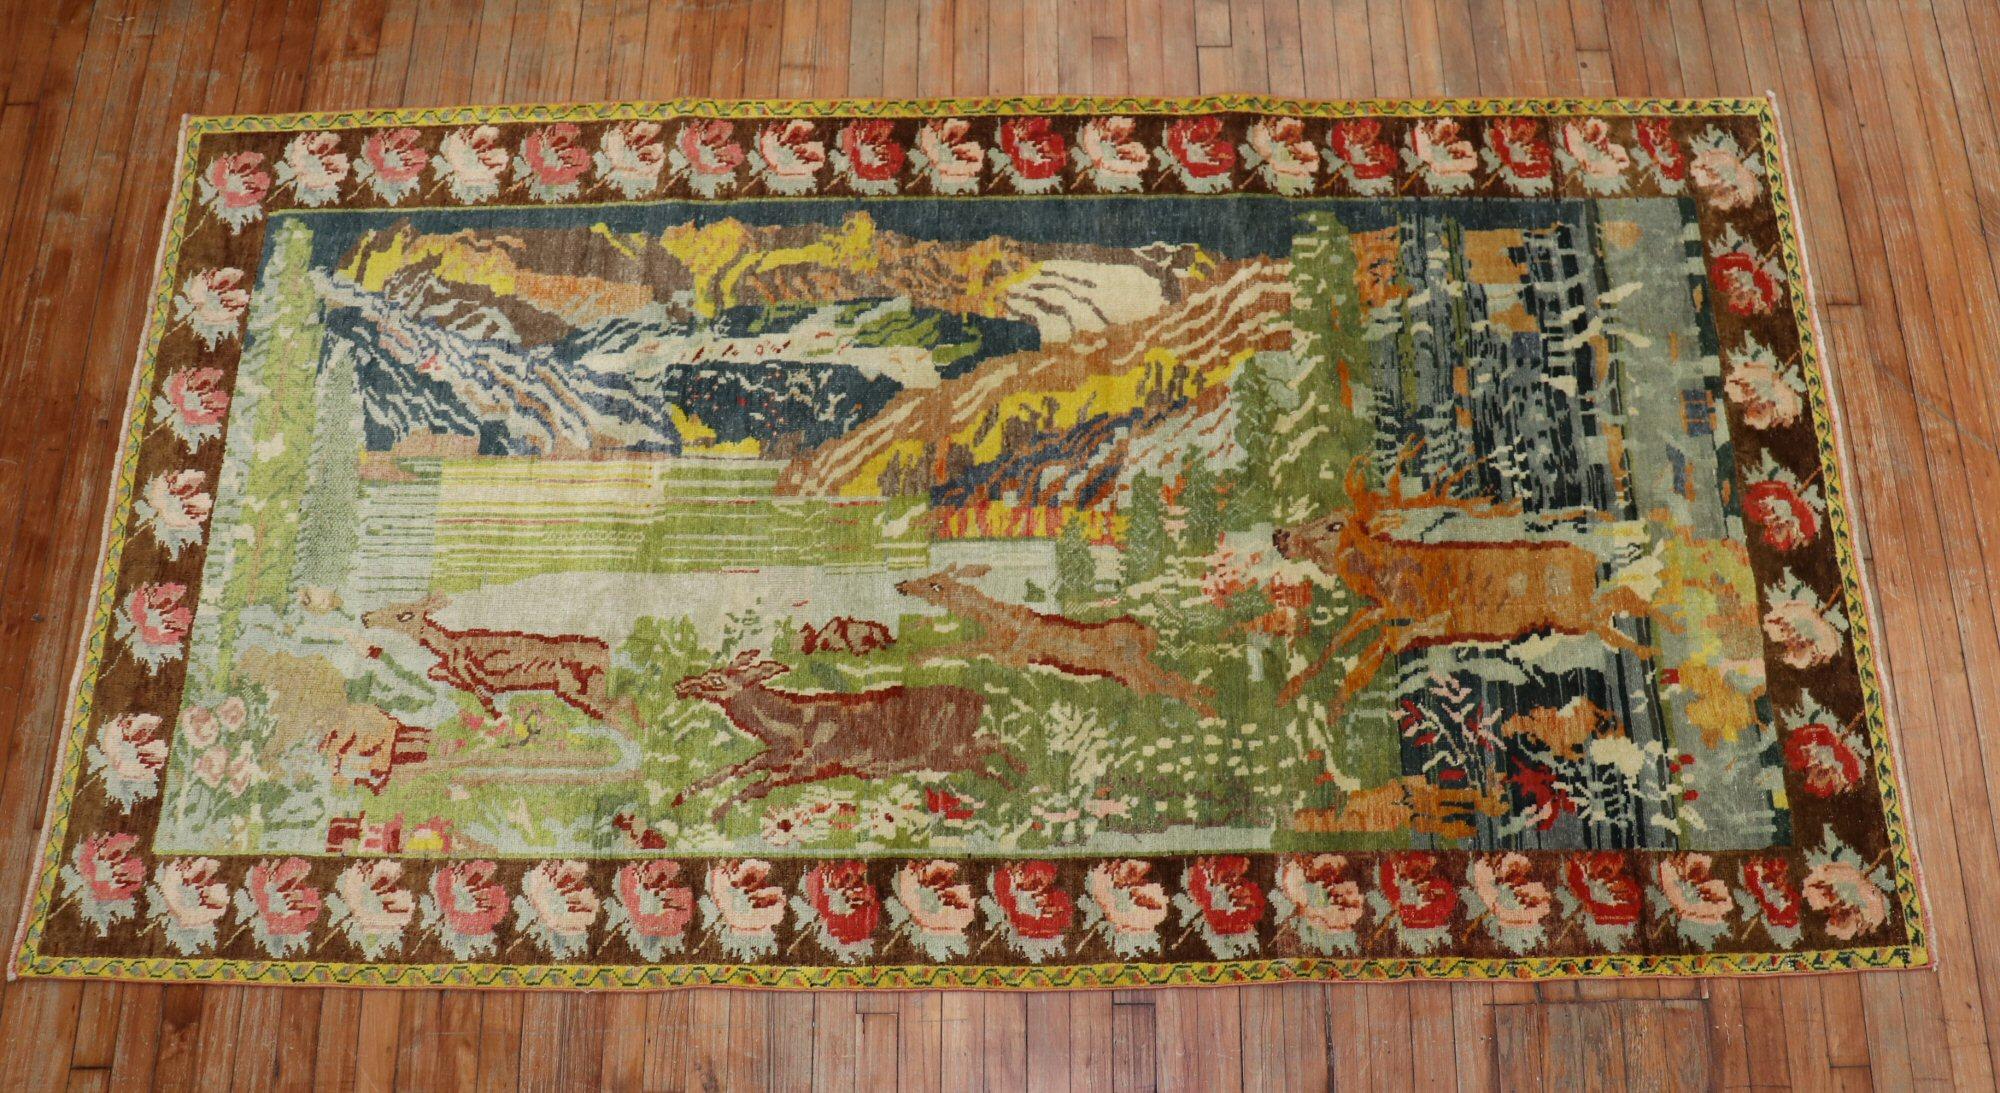 Lovely mid-20th century Russian Karabagh rug with 4 running deers on a scenic background and brown floral border.

Measures: 4'9